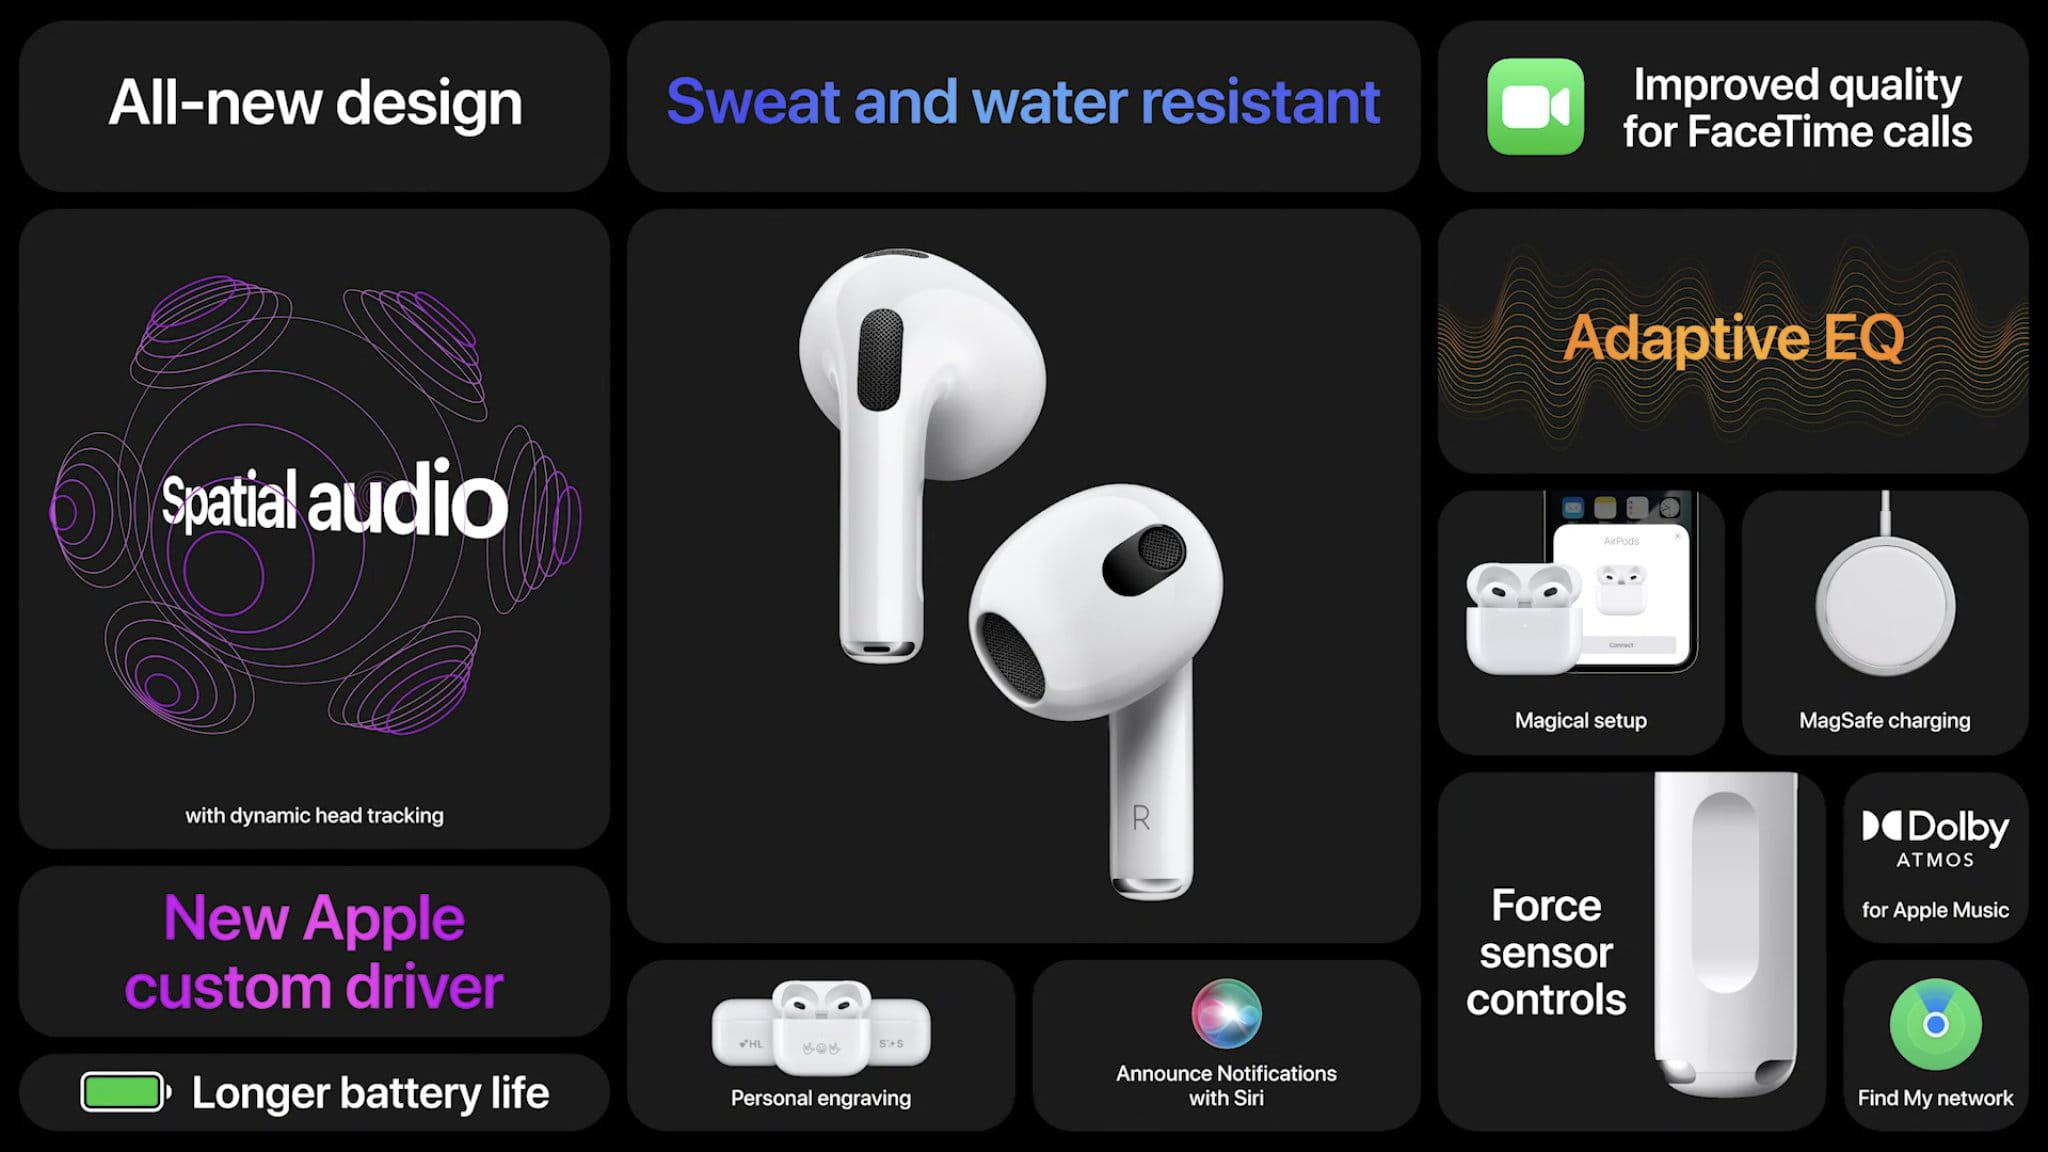 The new AirPods bring Spatial Audio and other features, while aiming towards a better battery life